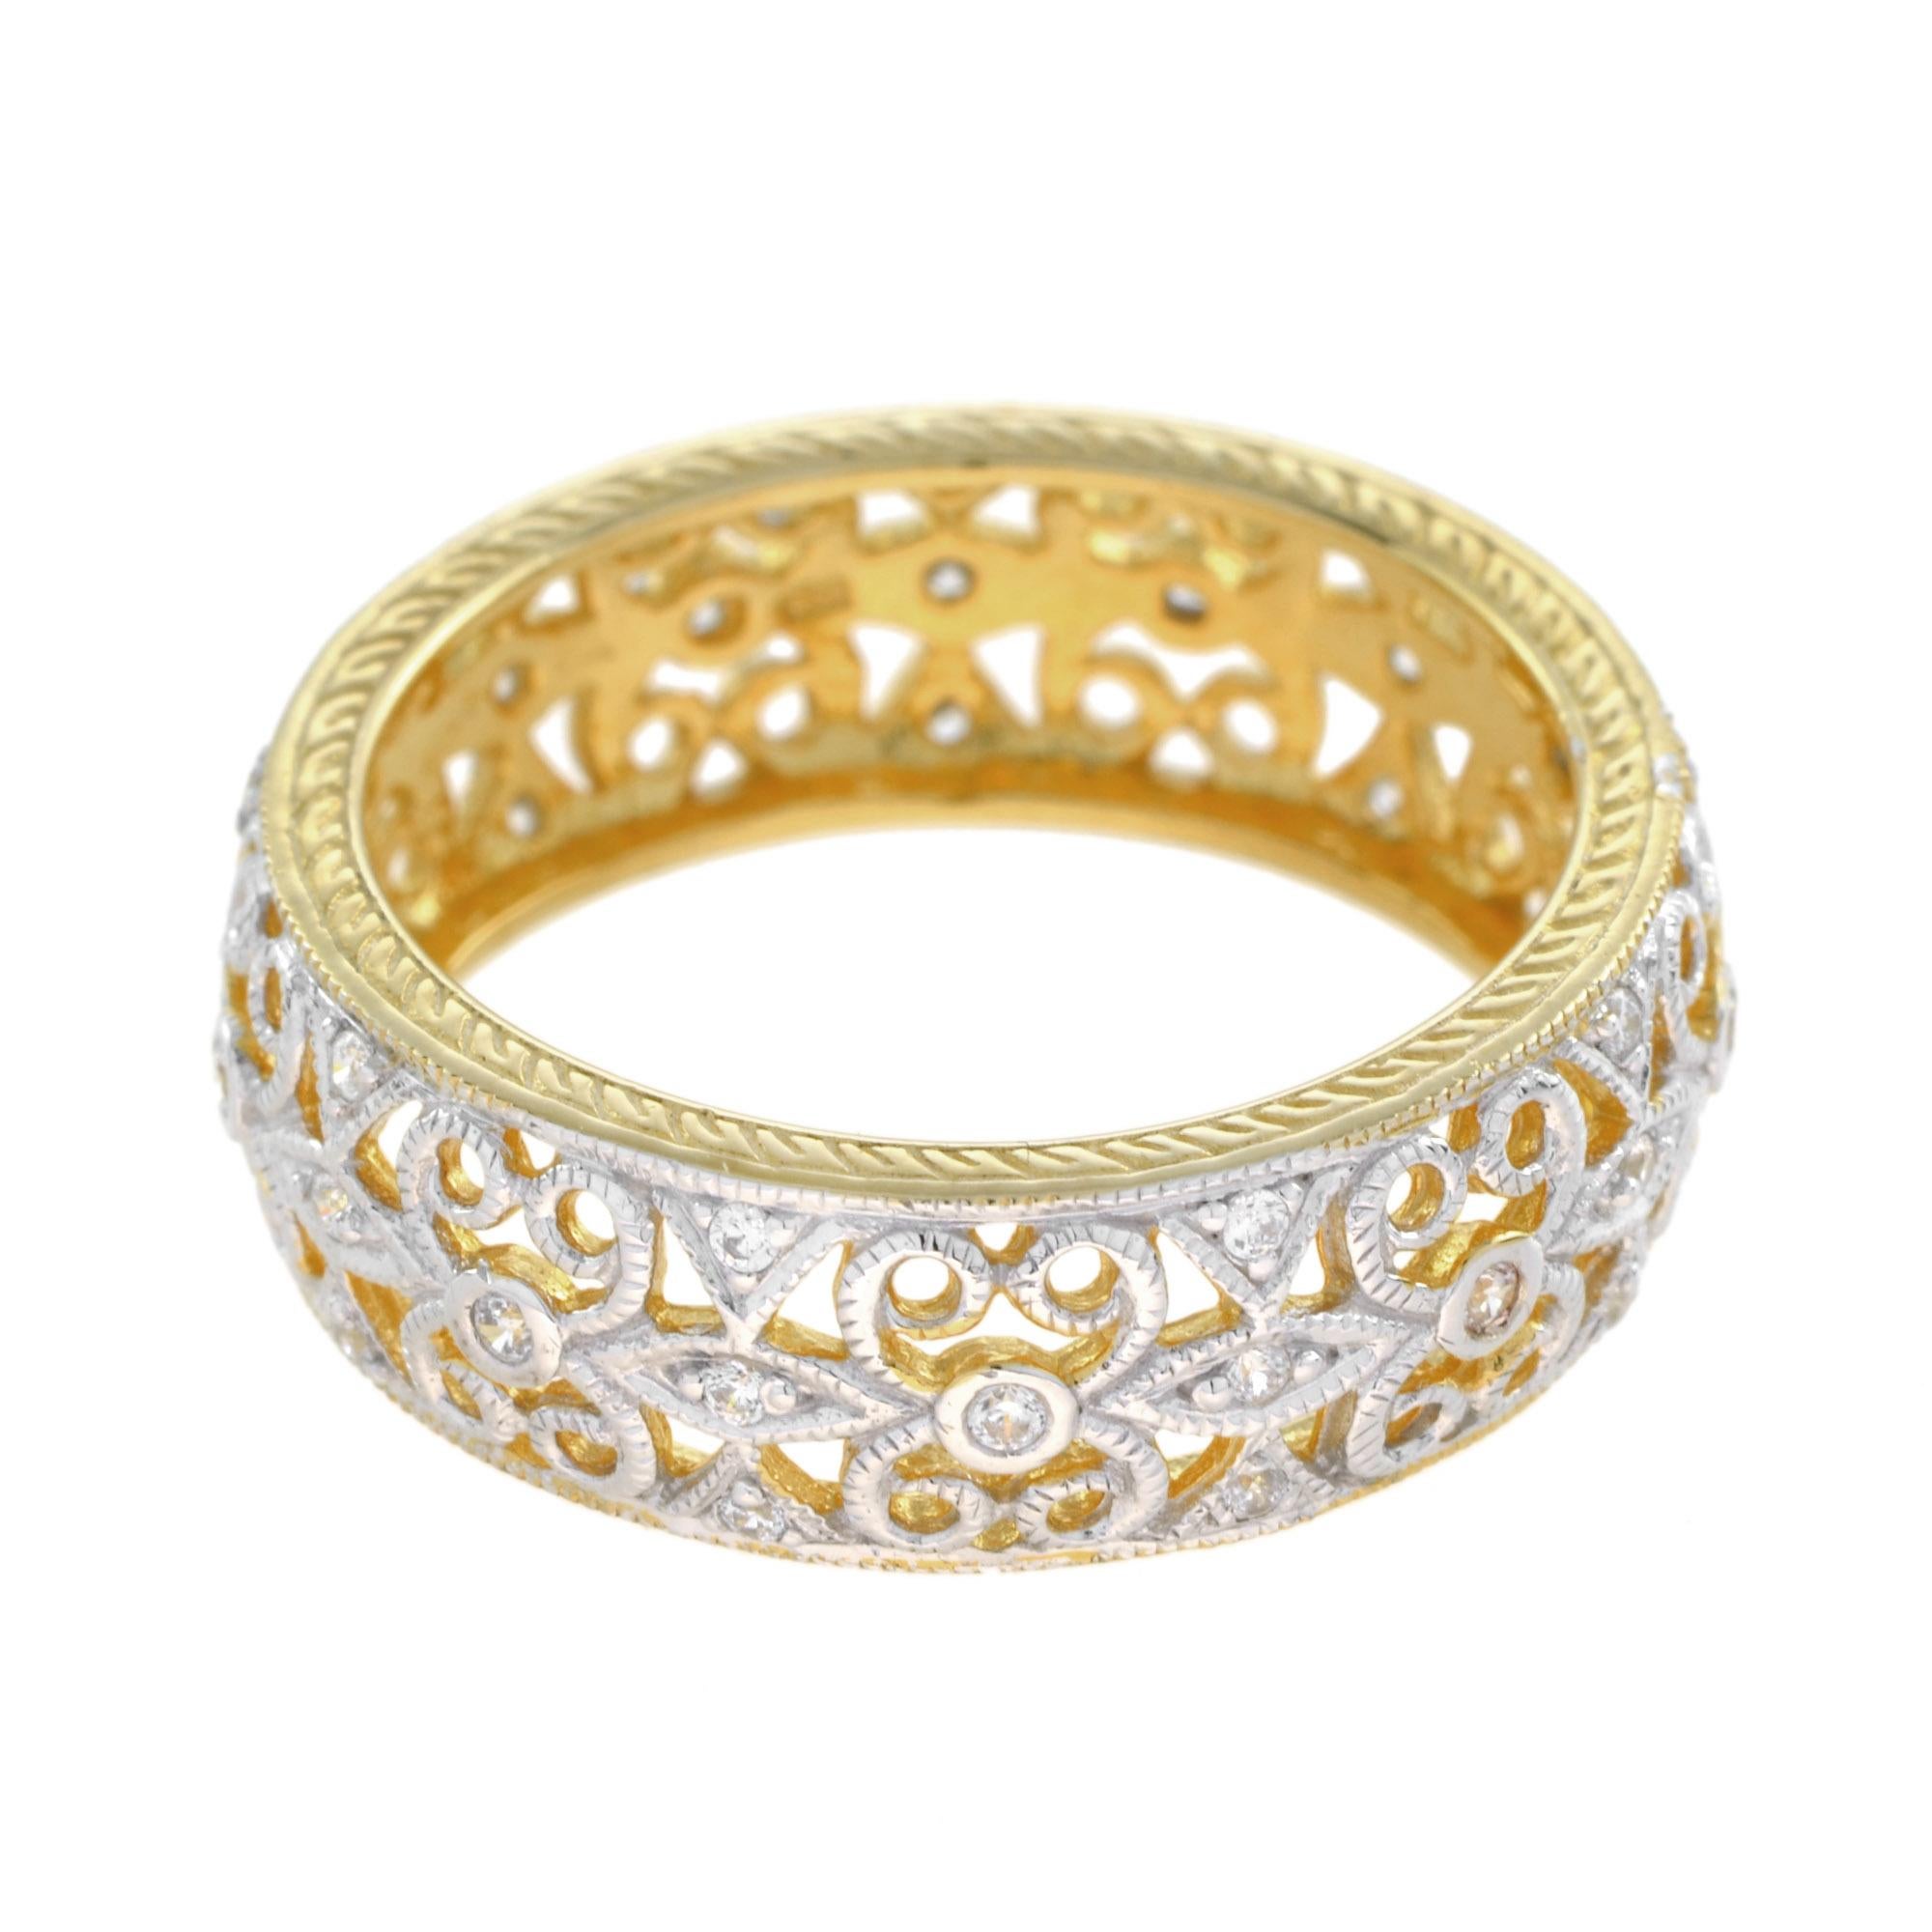 For Sale:  Art Deco Style Diamond Floral Filigree Eternity Band Ring in 14K Yellow Gold 3